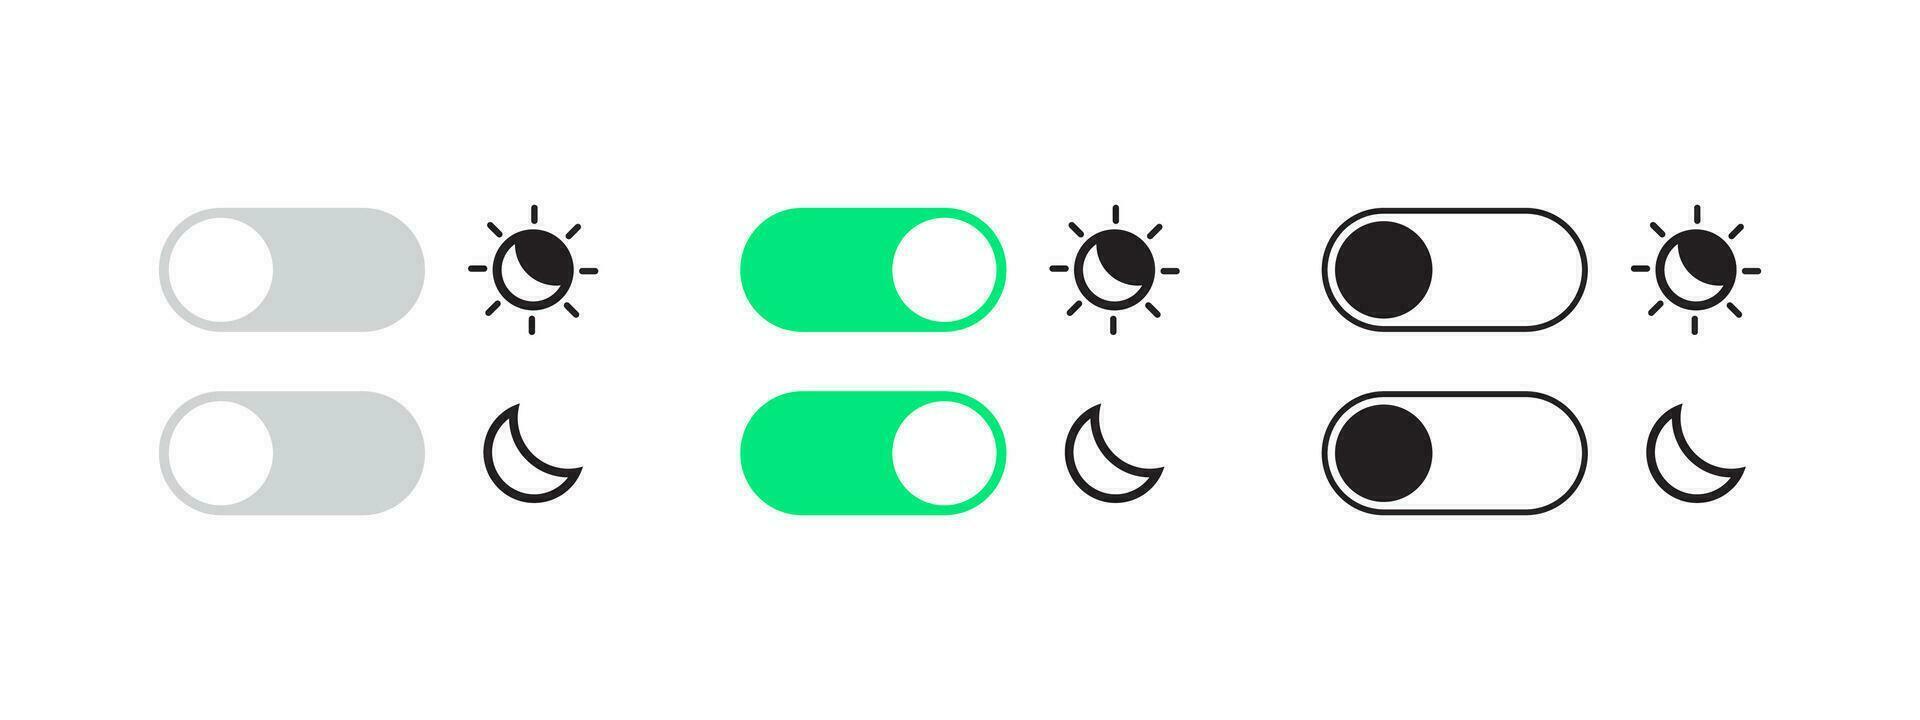 Day night mode switching icons. Car interface icons. Vector scalable graphics